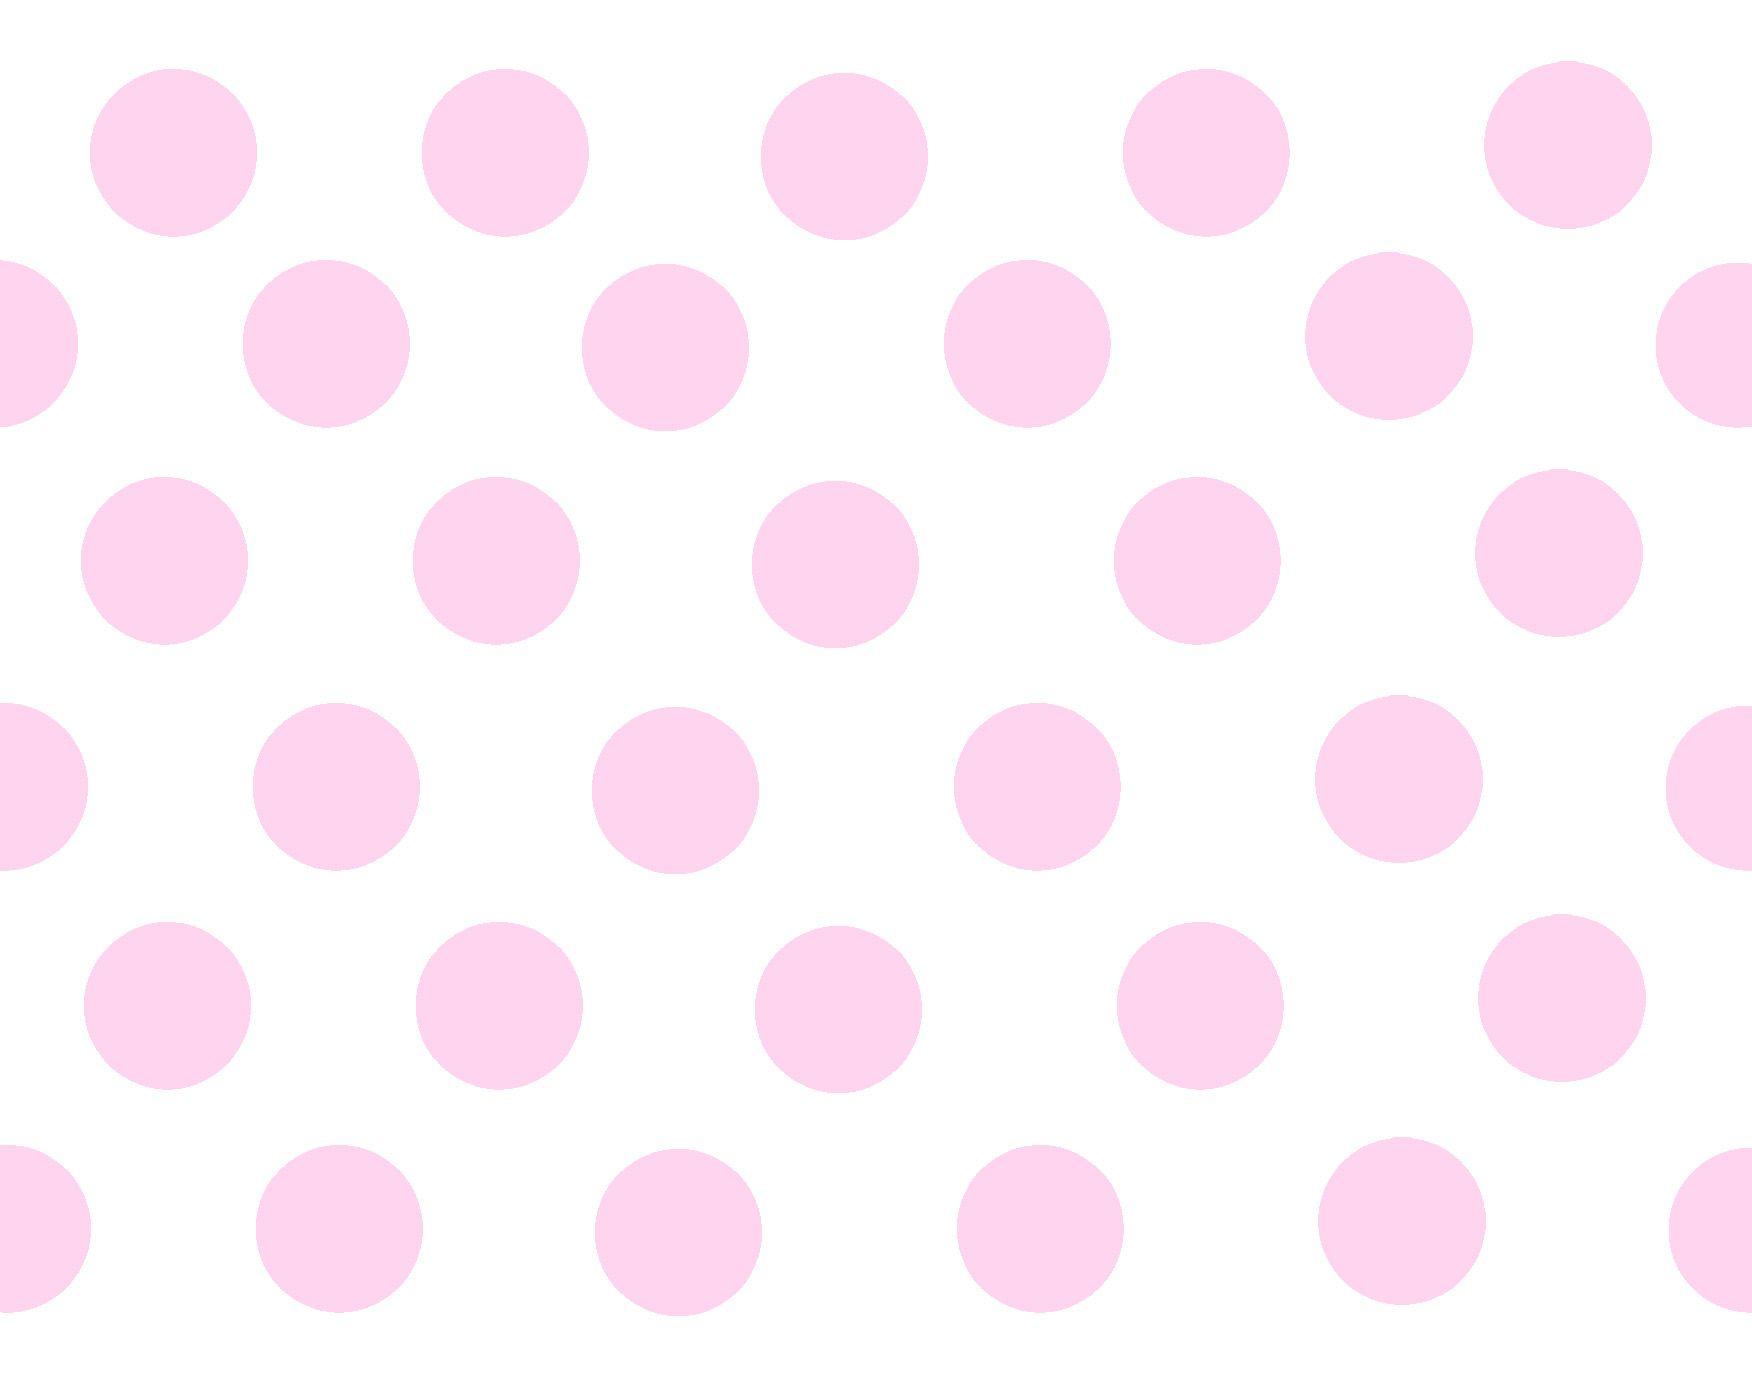 Recolectar 163+ imagen pink background with white polka dots ...